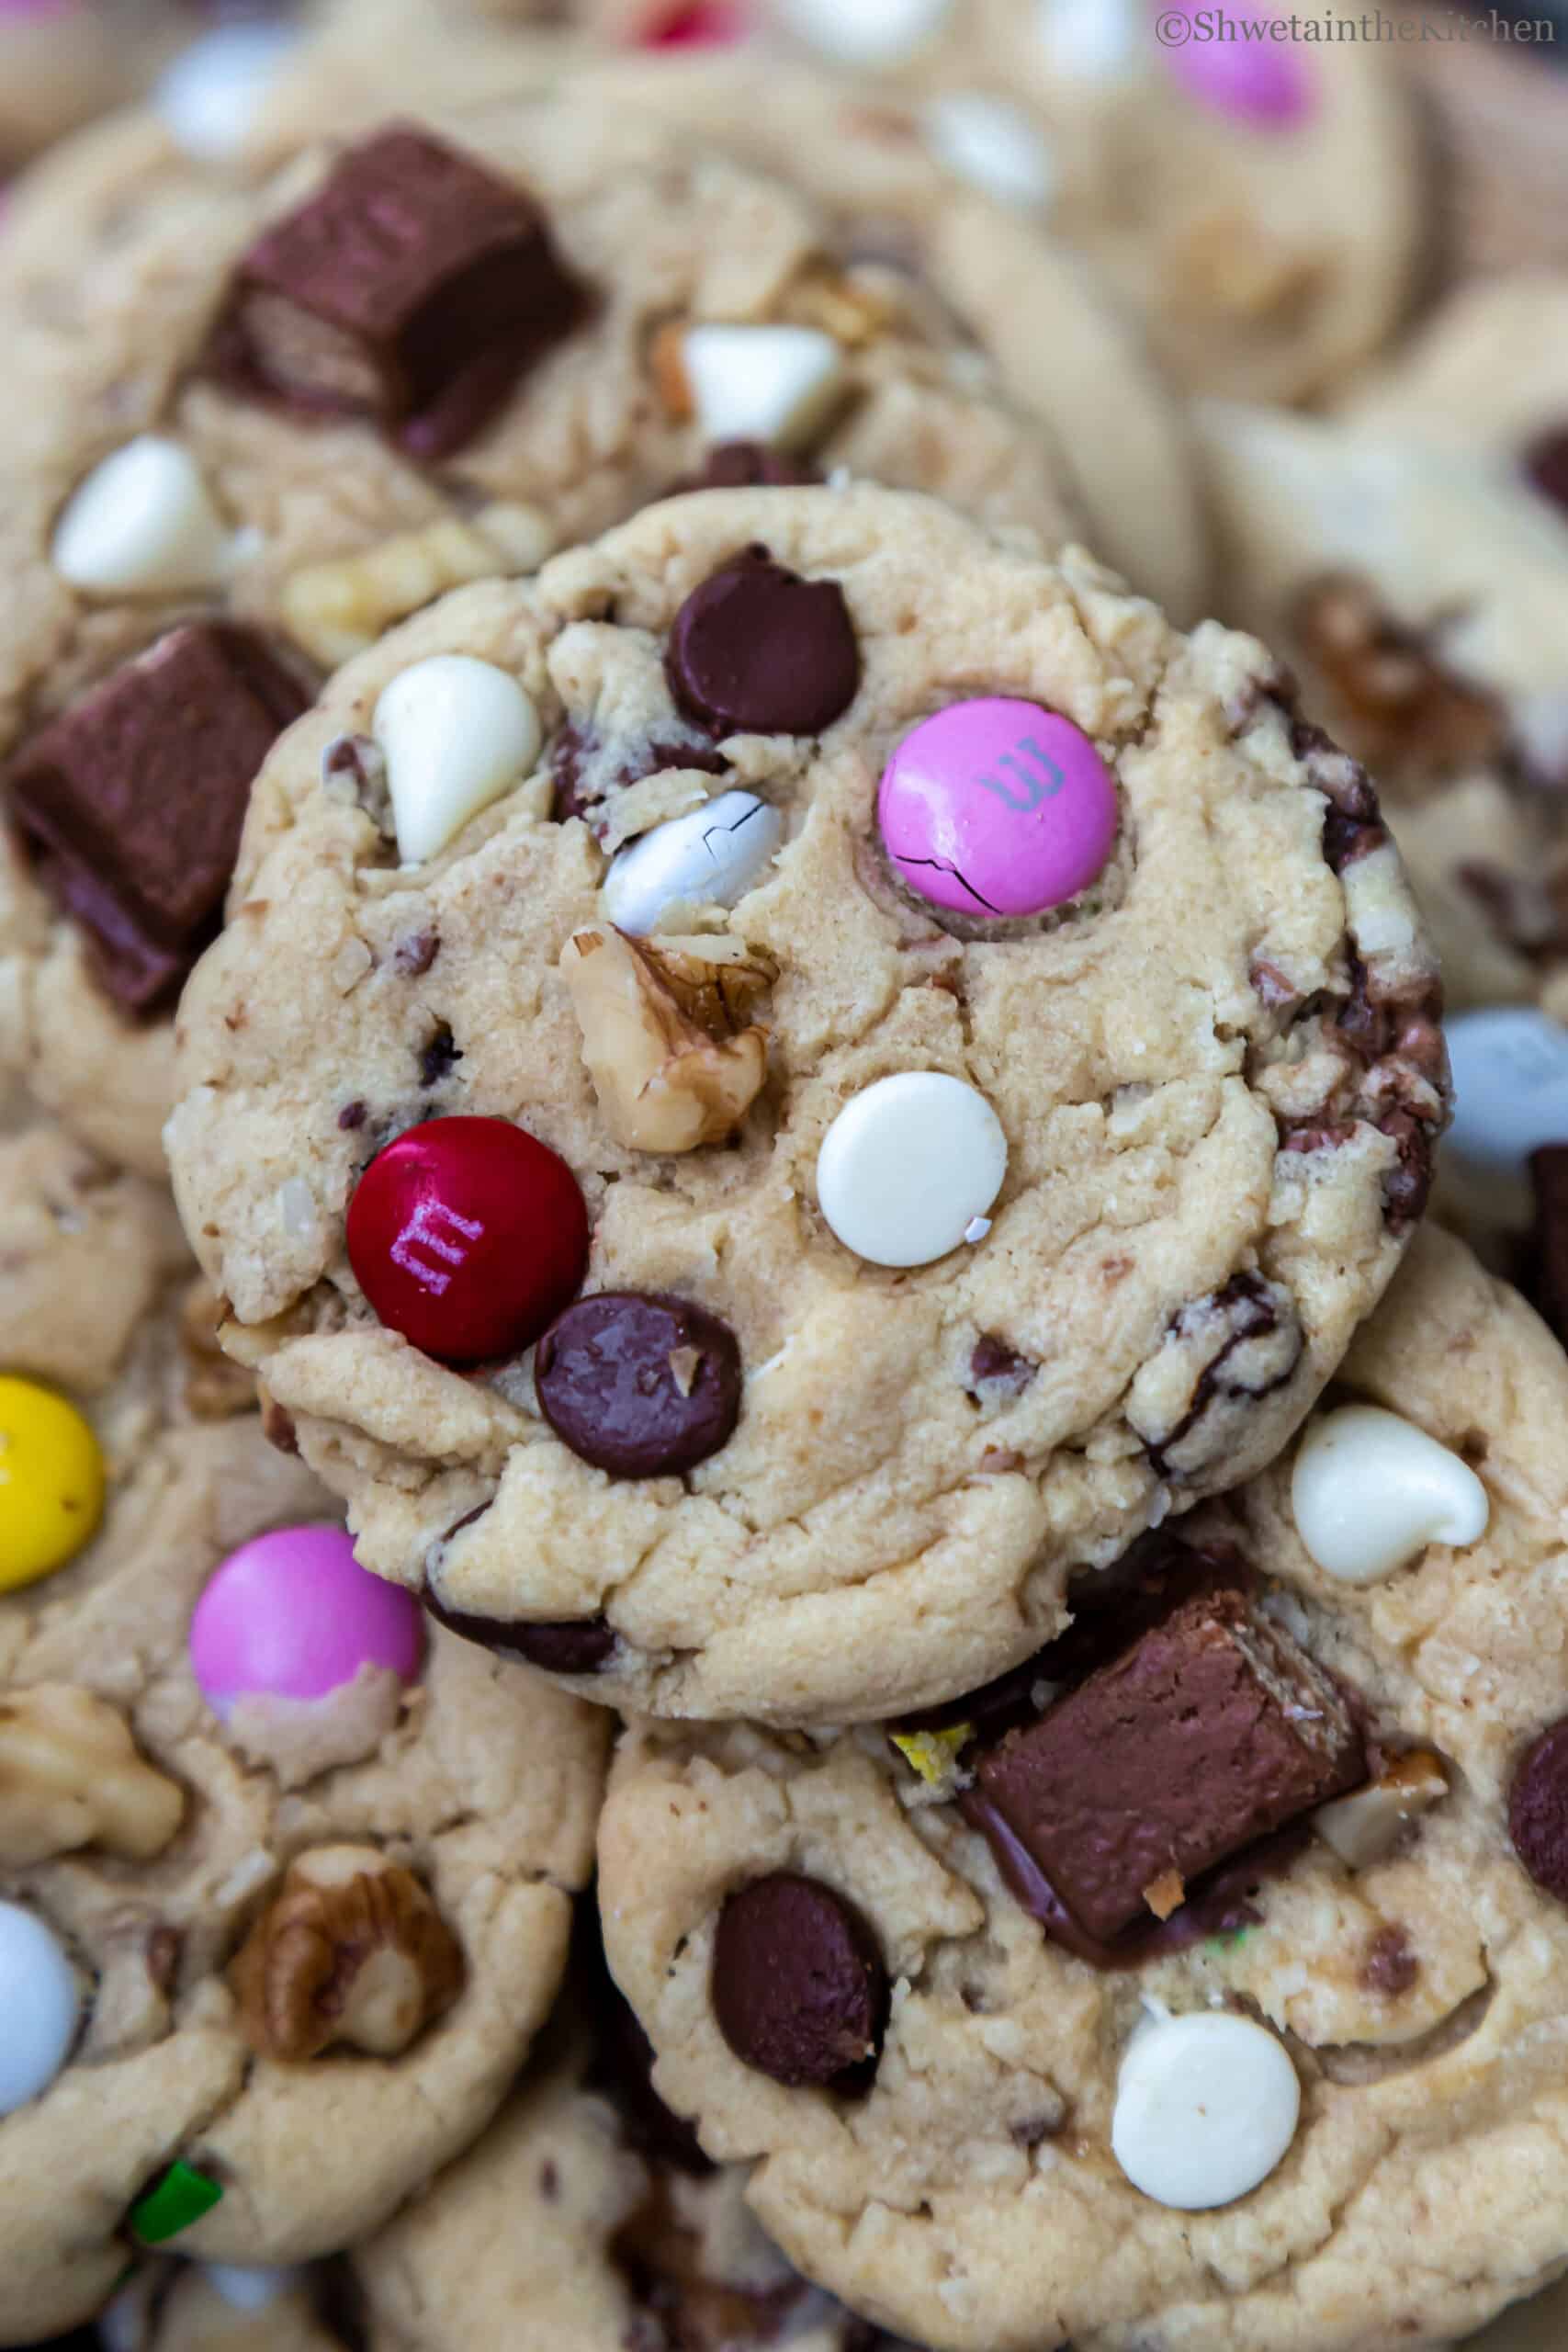 zoomed in view of Eggless Kitchen Sink Cookies showing chocolate chips, walnuts and M&M's